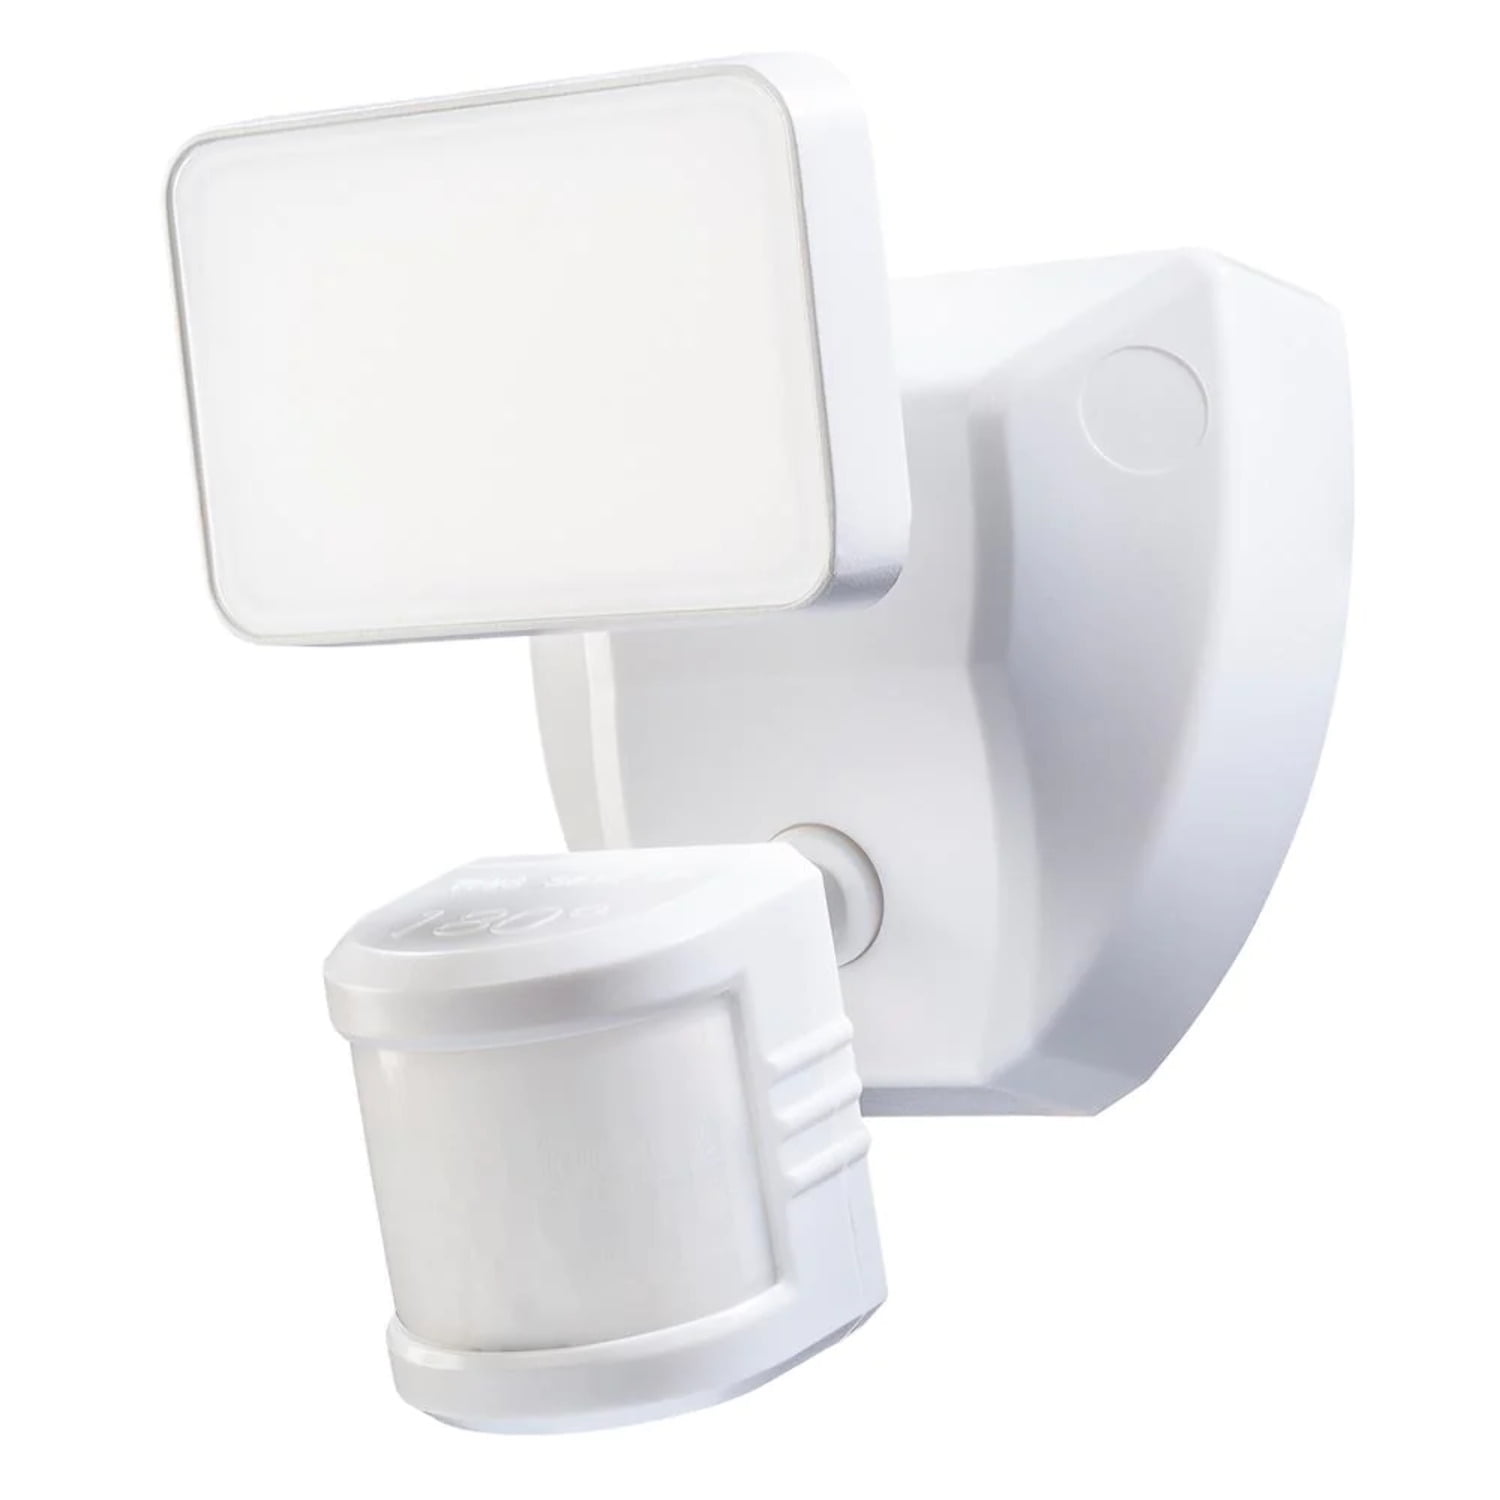 LED Motion Sensor Wi-Fi Outdoor Light Connected